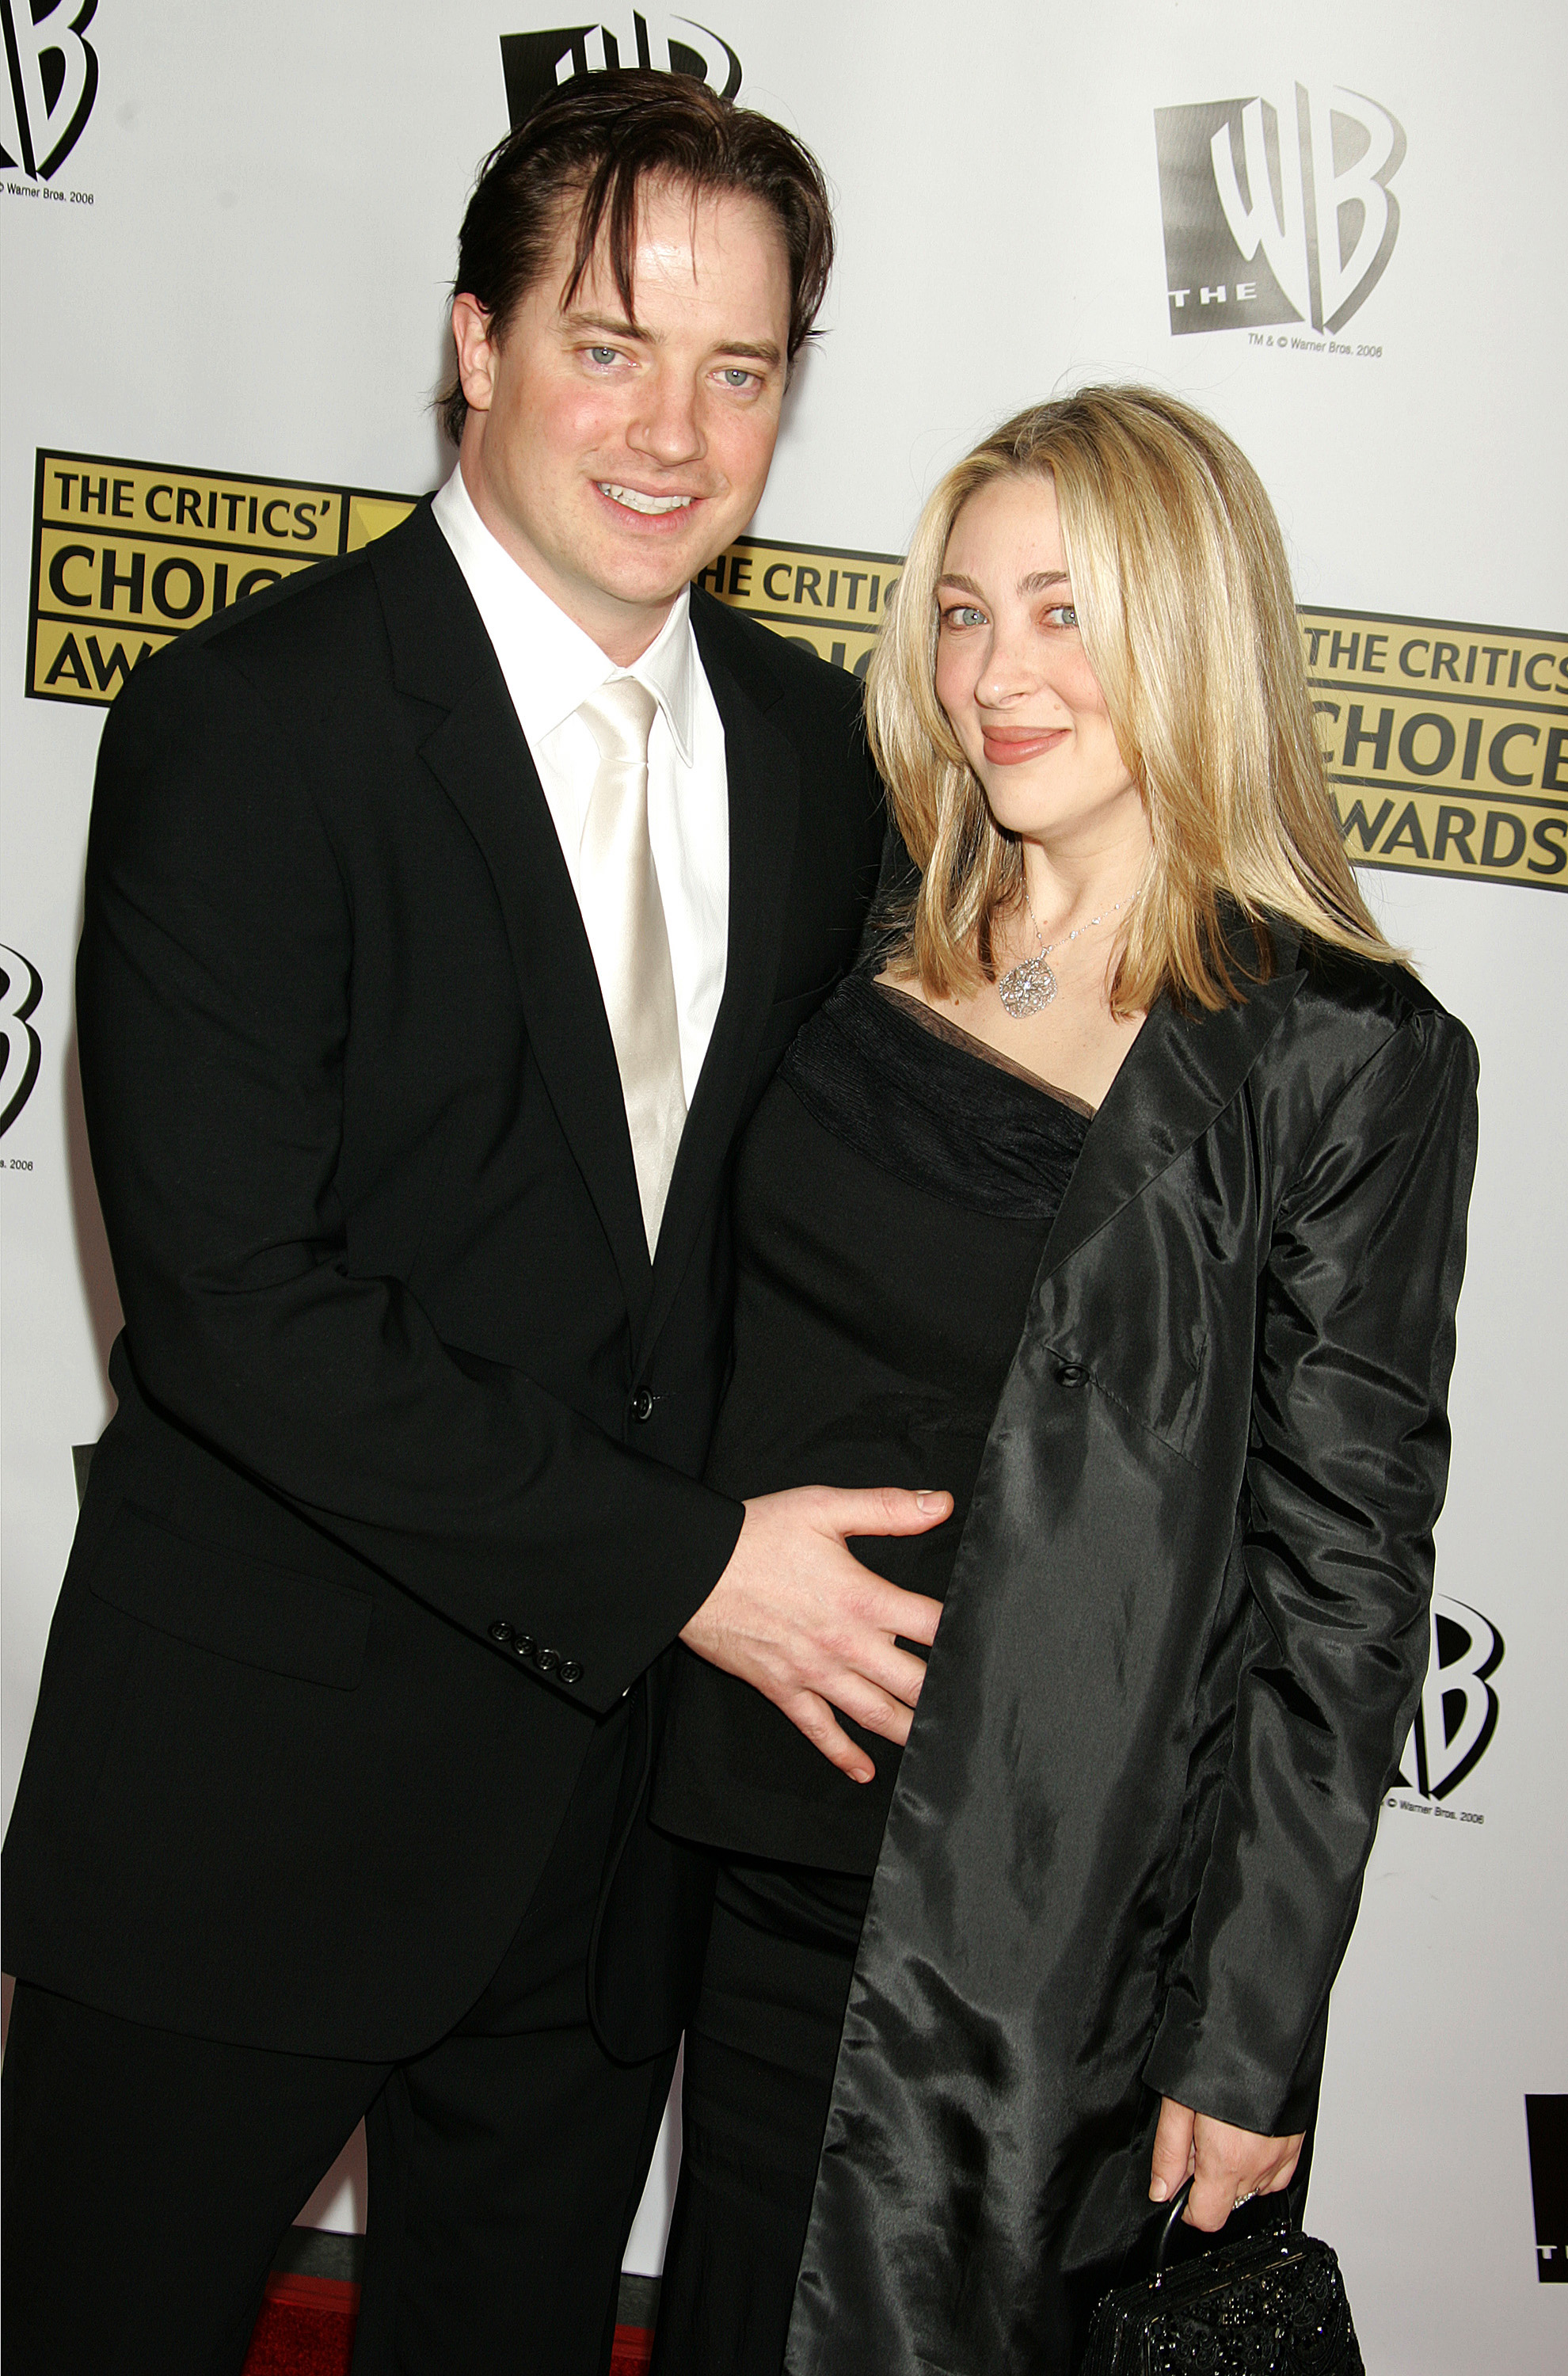 Brendan Fraser and Afton Smith during the 11th Annual Critics' Choice Awards in Santa Monica, California, on January 9, 2006 | Source: Getty Images